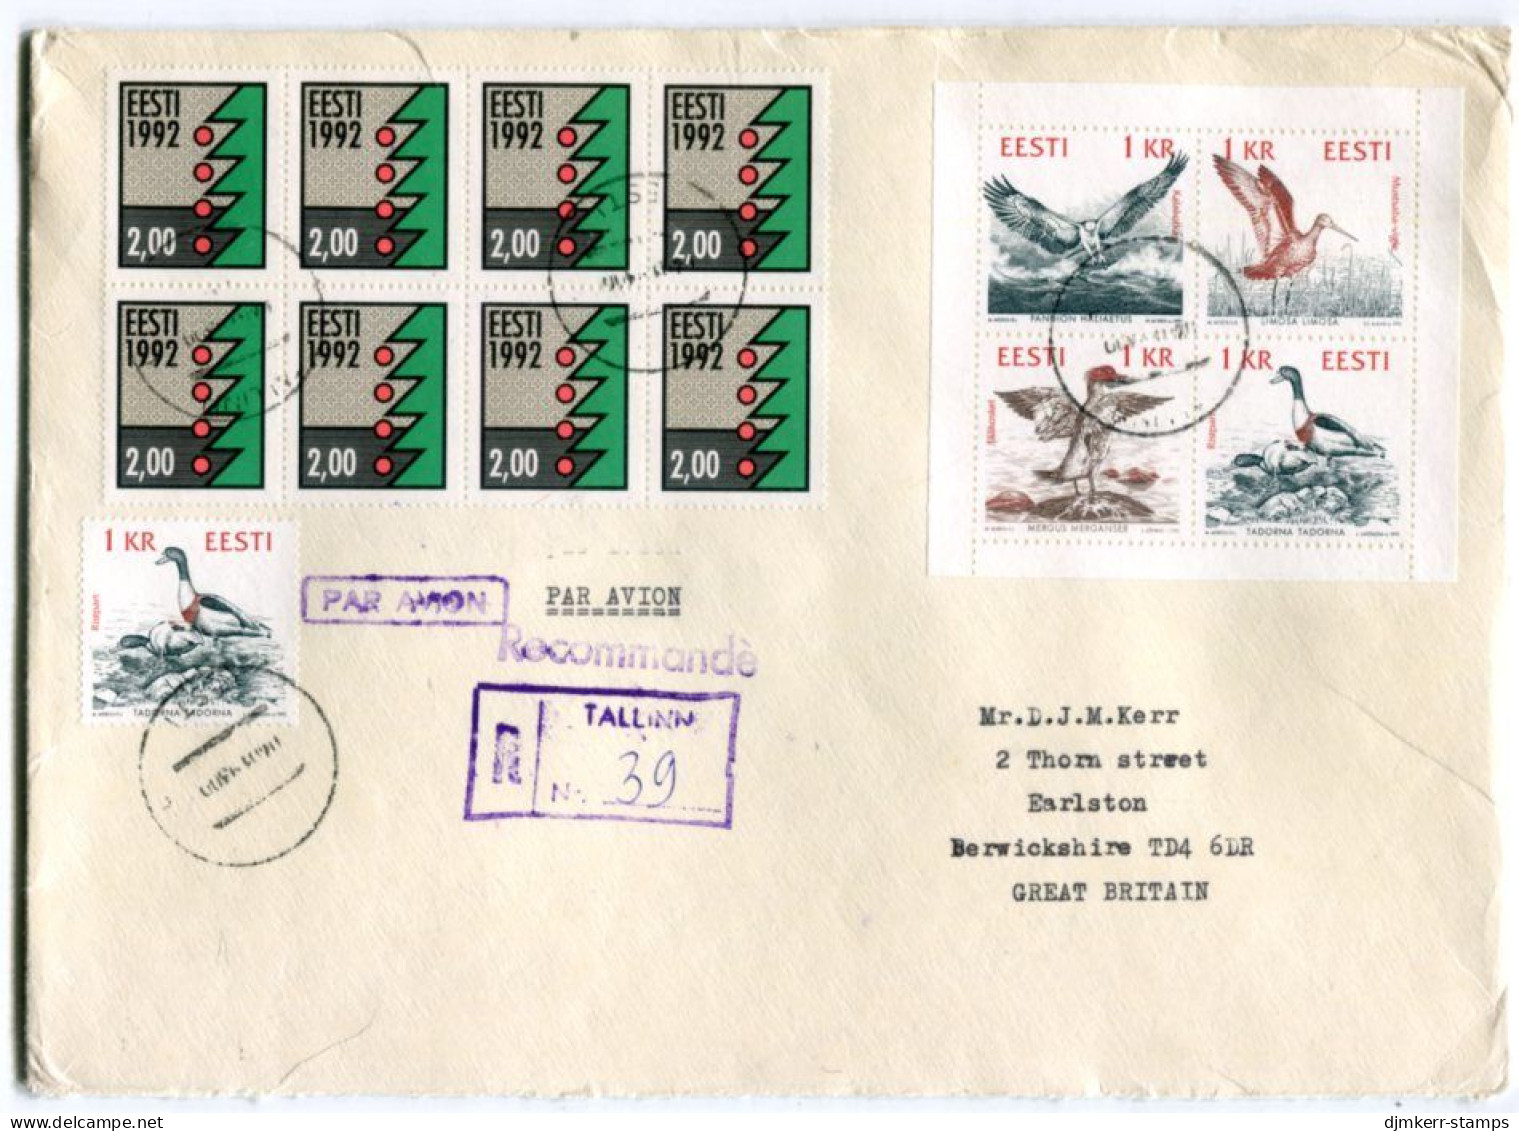 ESTONIA 1992 Registered Cover With Birds And Christmas Stamps.  Michel 188-91, 196x - Estland